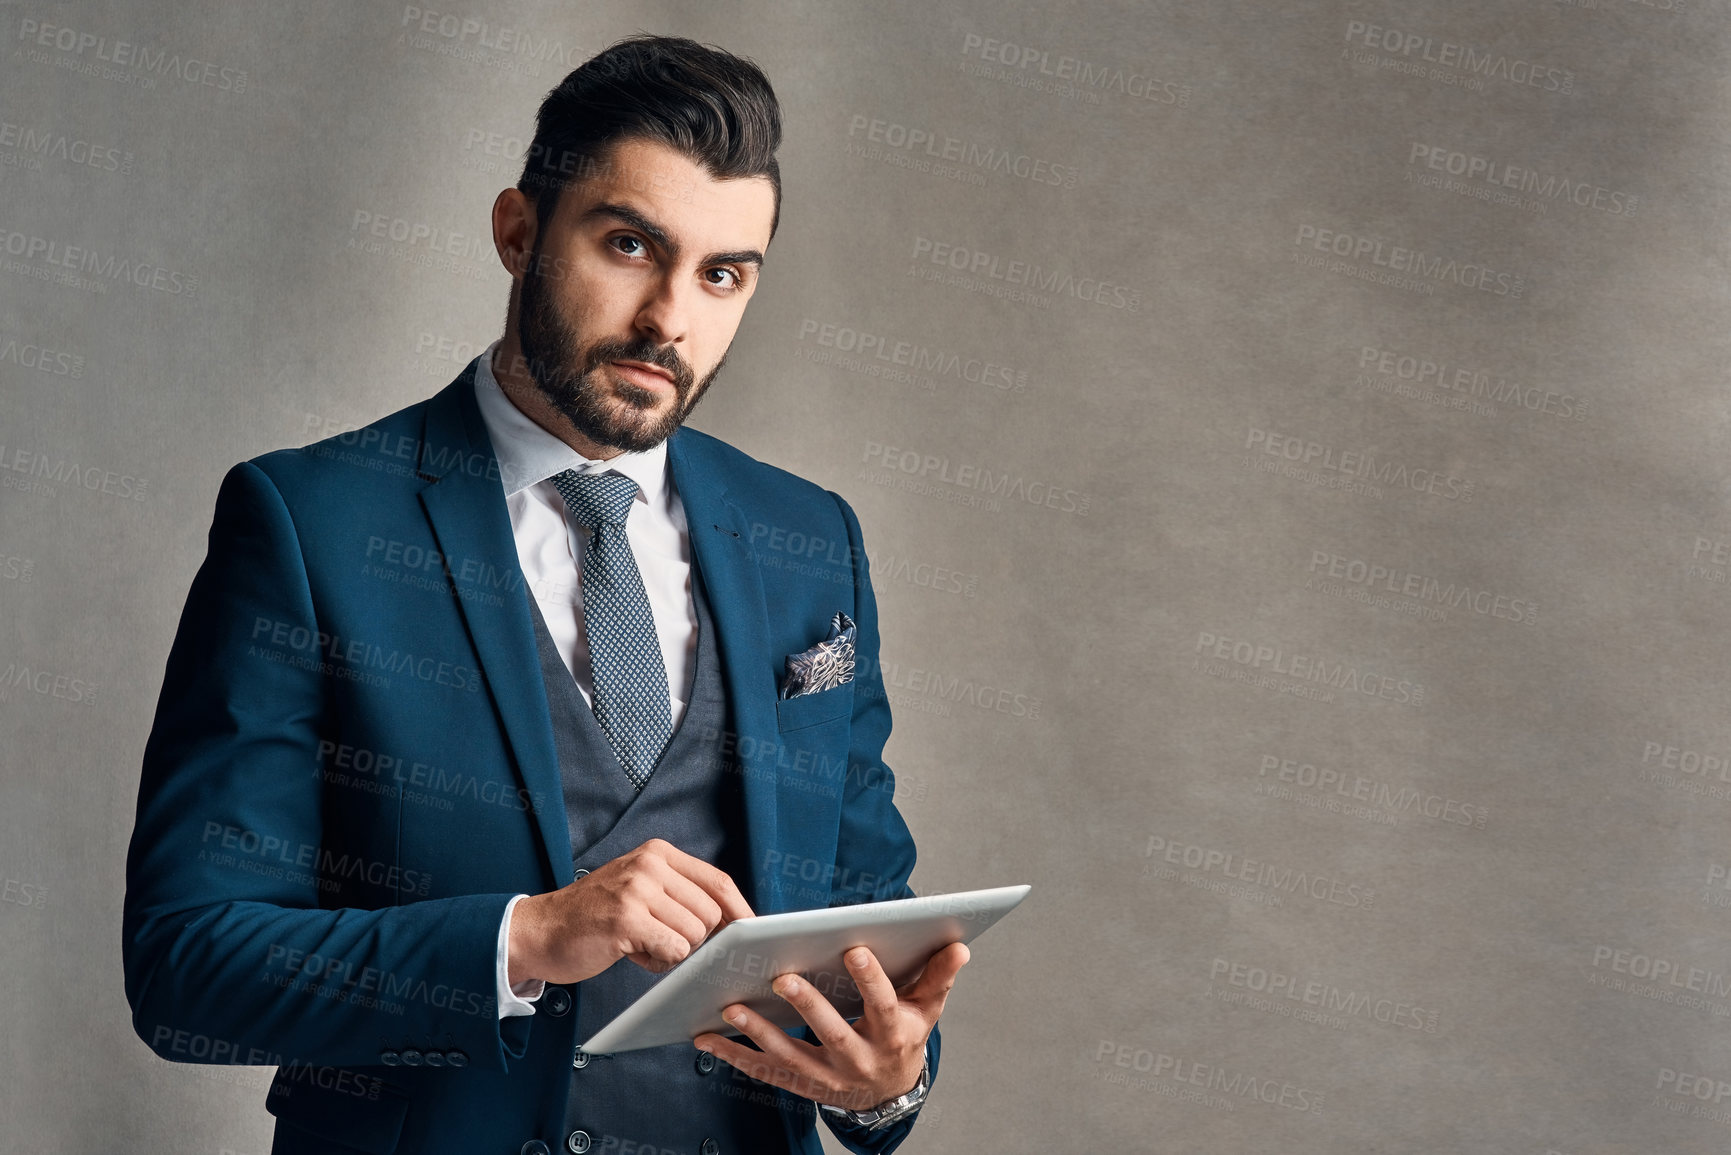 Buy stock photo Studio portrait of a stylishly dressed young businessman using a digital tablet against a grey background